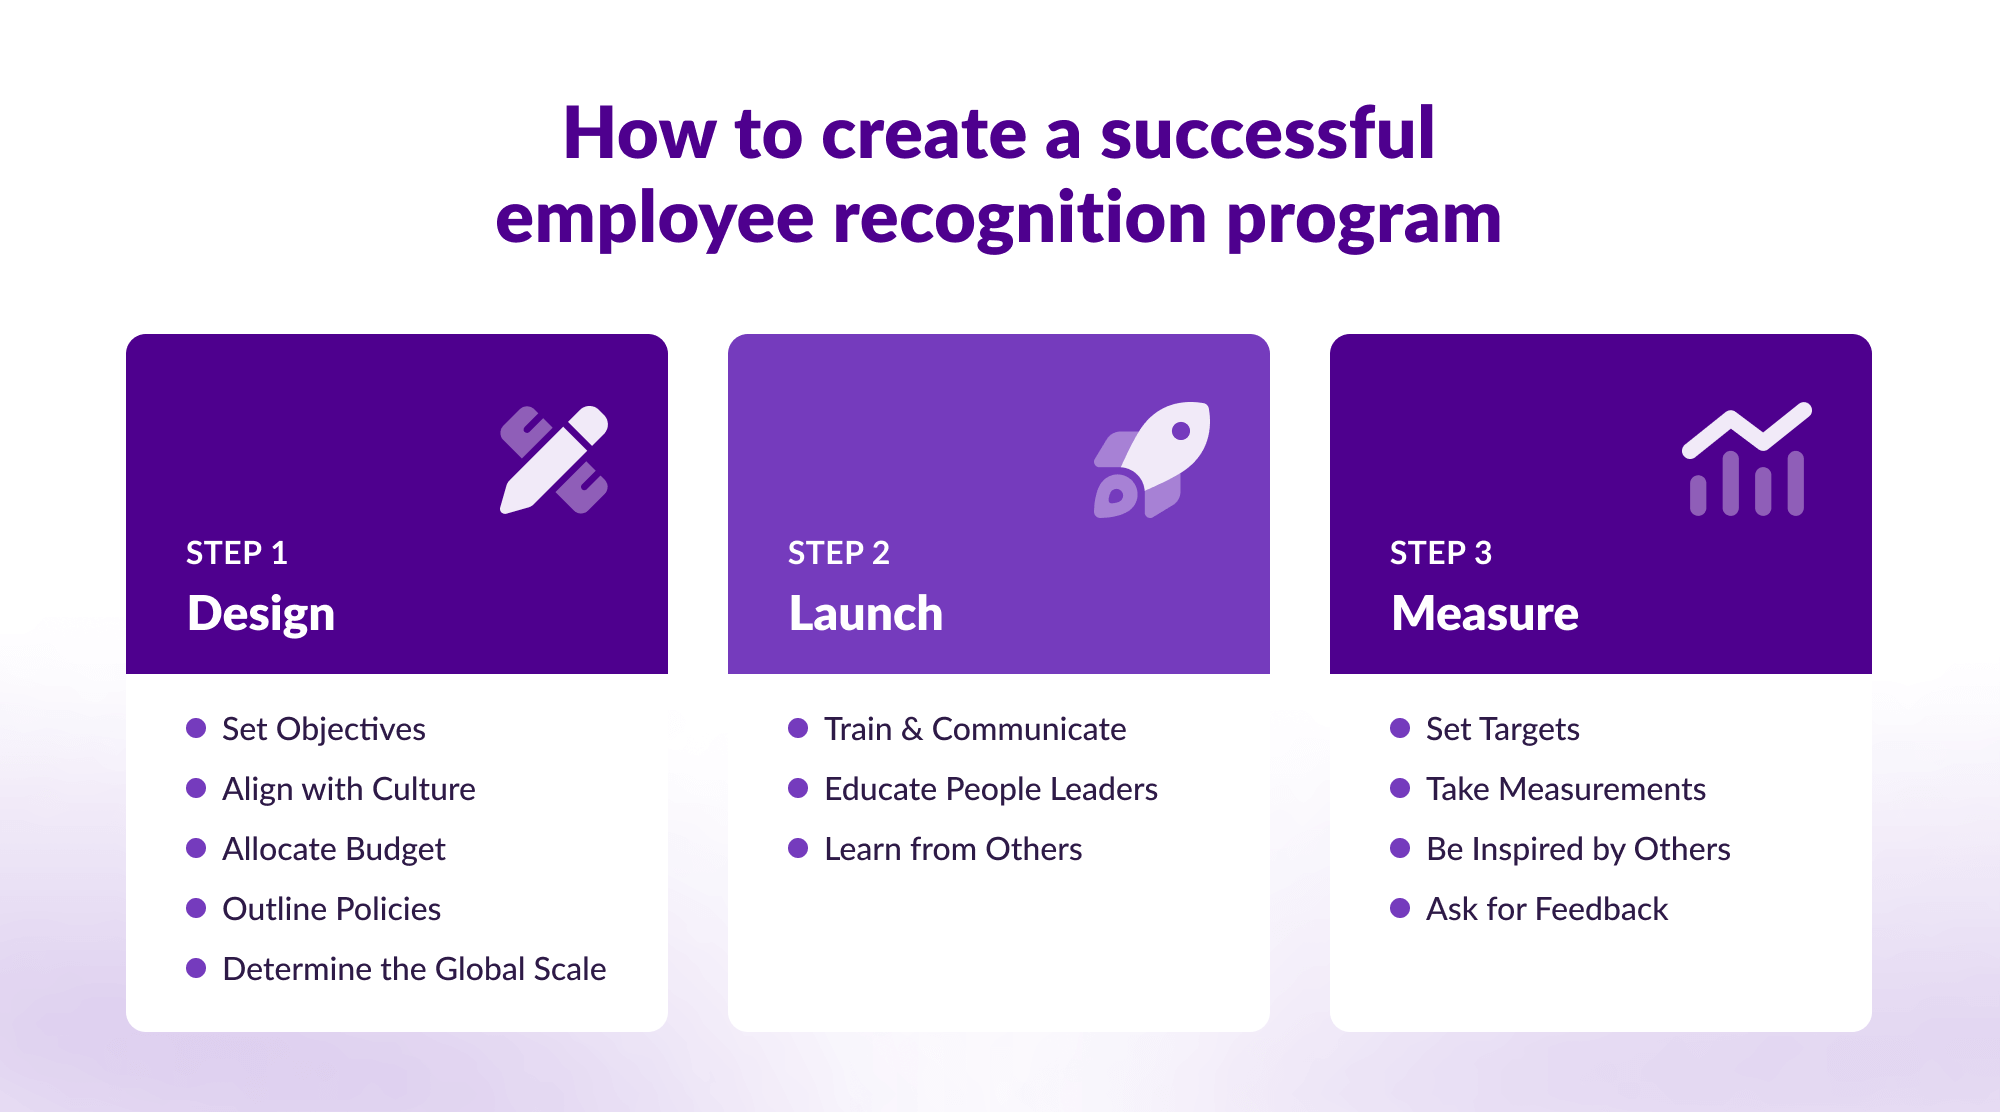 How to create an employee recognition program